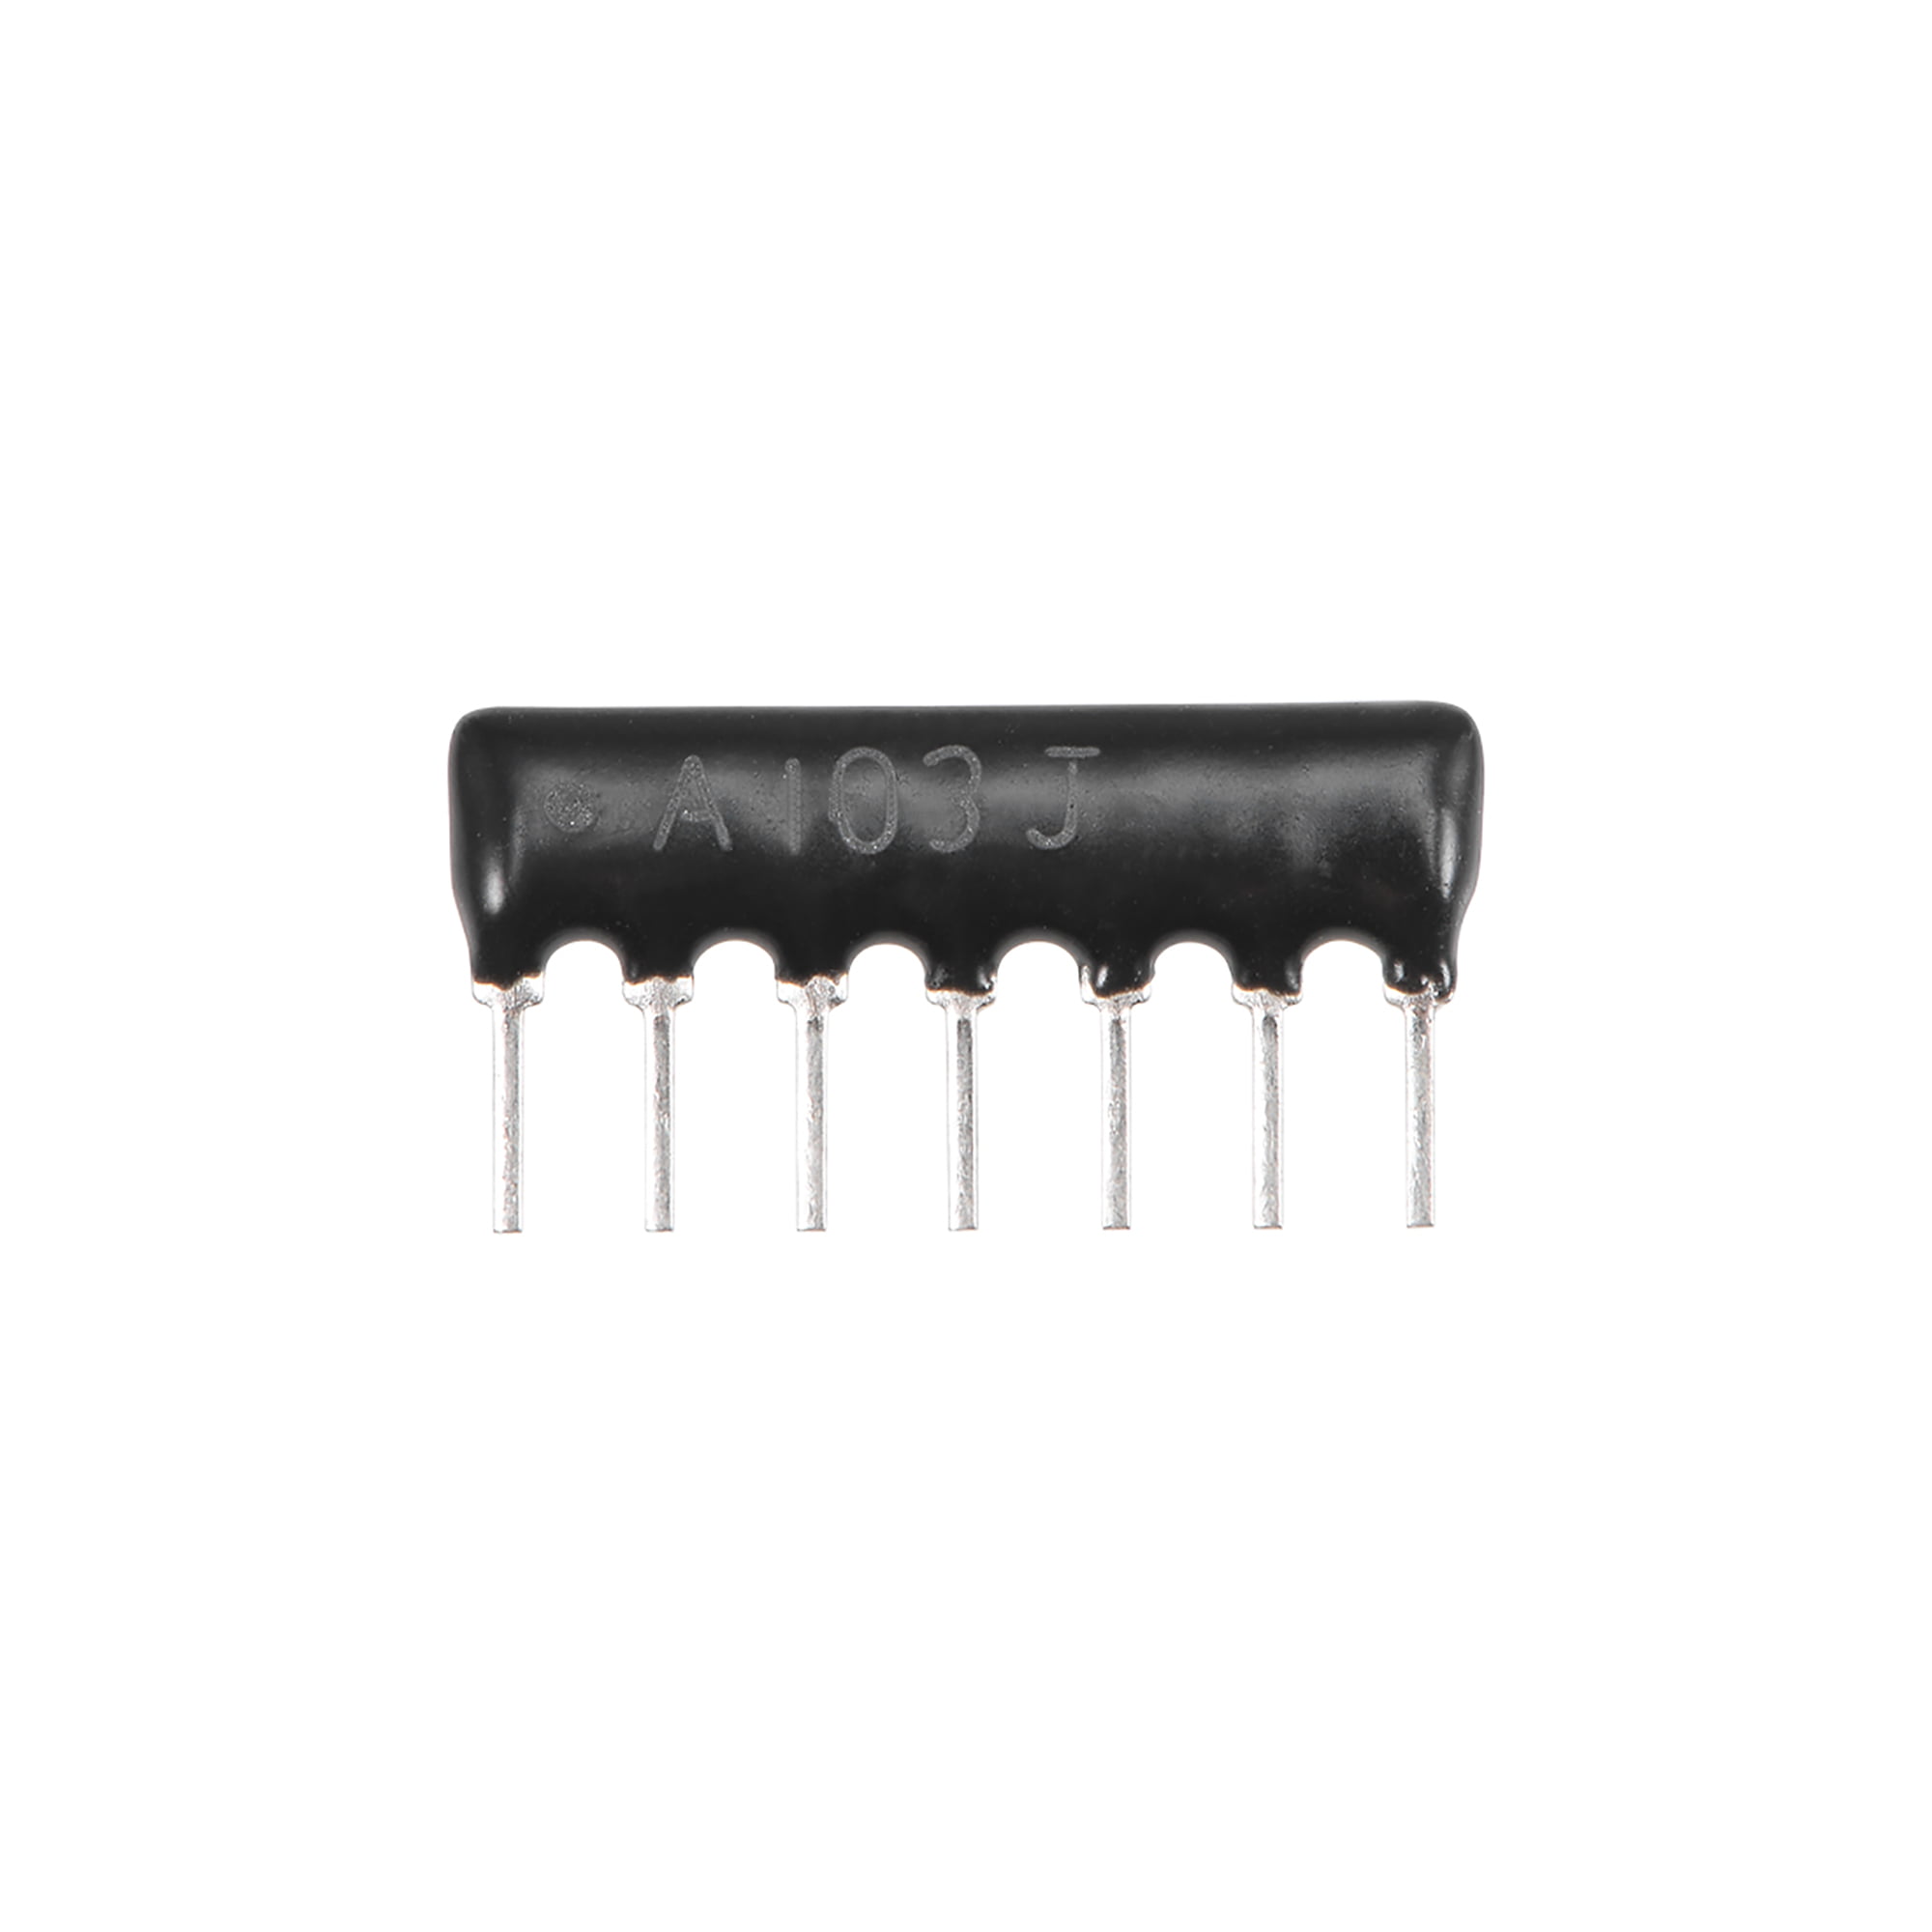 AORN2001AT5 RES NETWORK 4 RES 2K OHM 8SOIC Pack of 10 